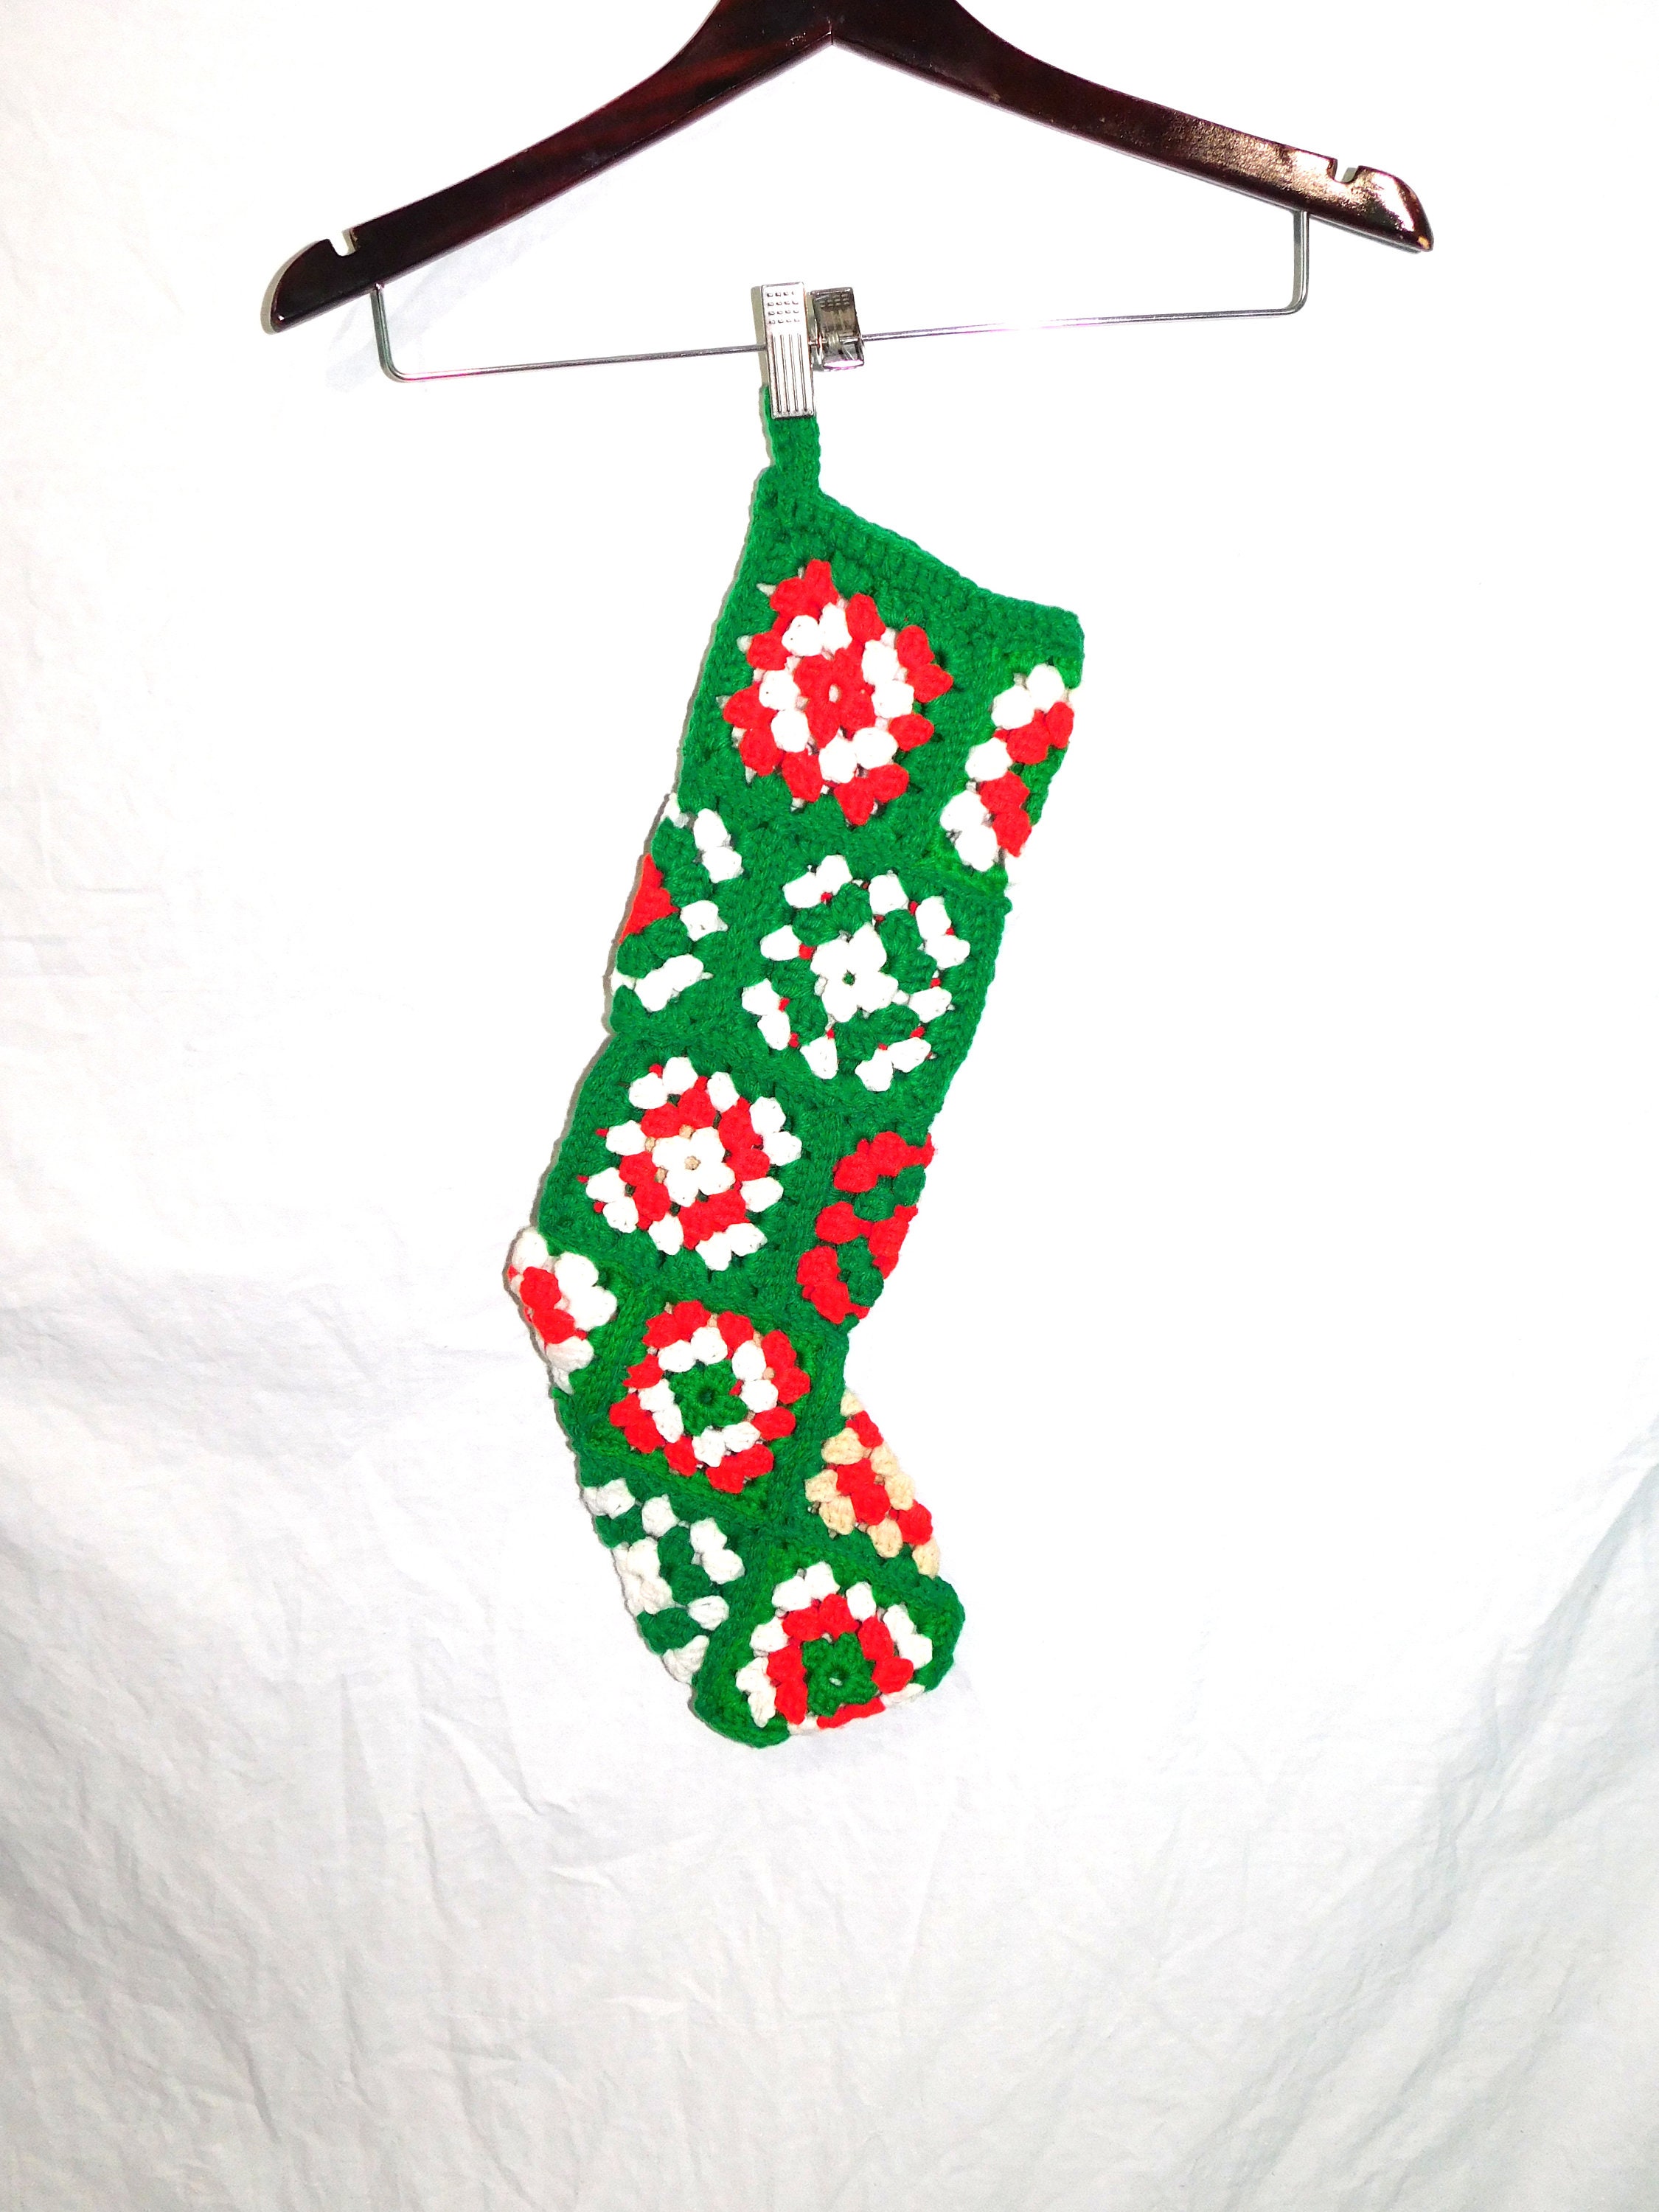 MCM Small Stocking with Furry Mouse Christmas Ornament, Handmade Crochet  Stocking - Just Vintage Christmas